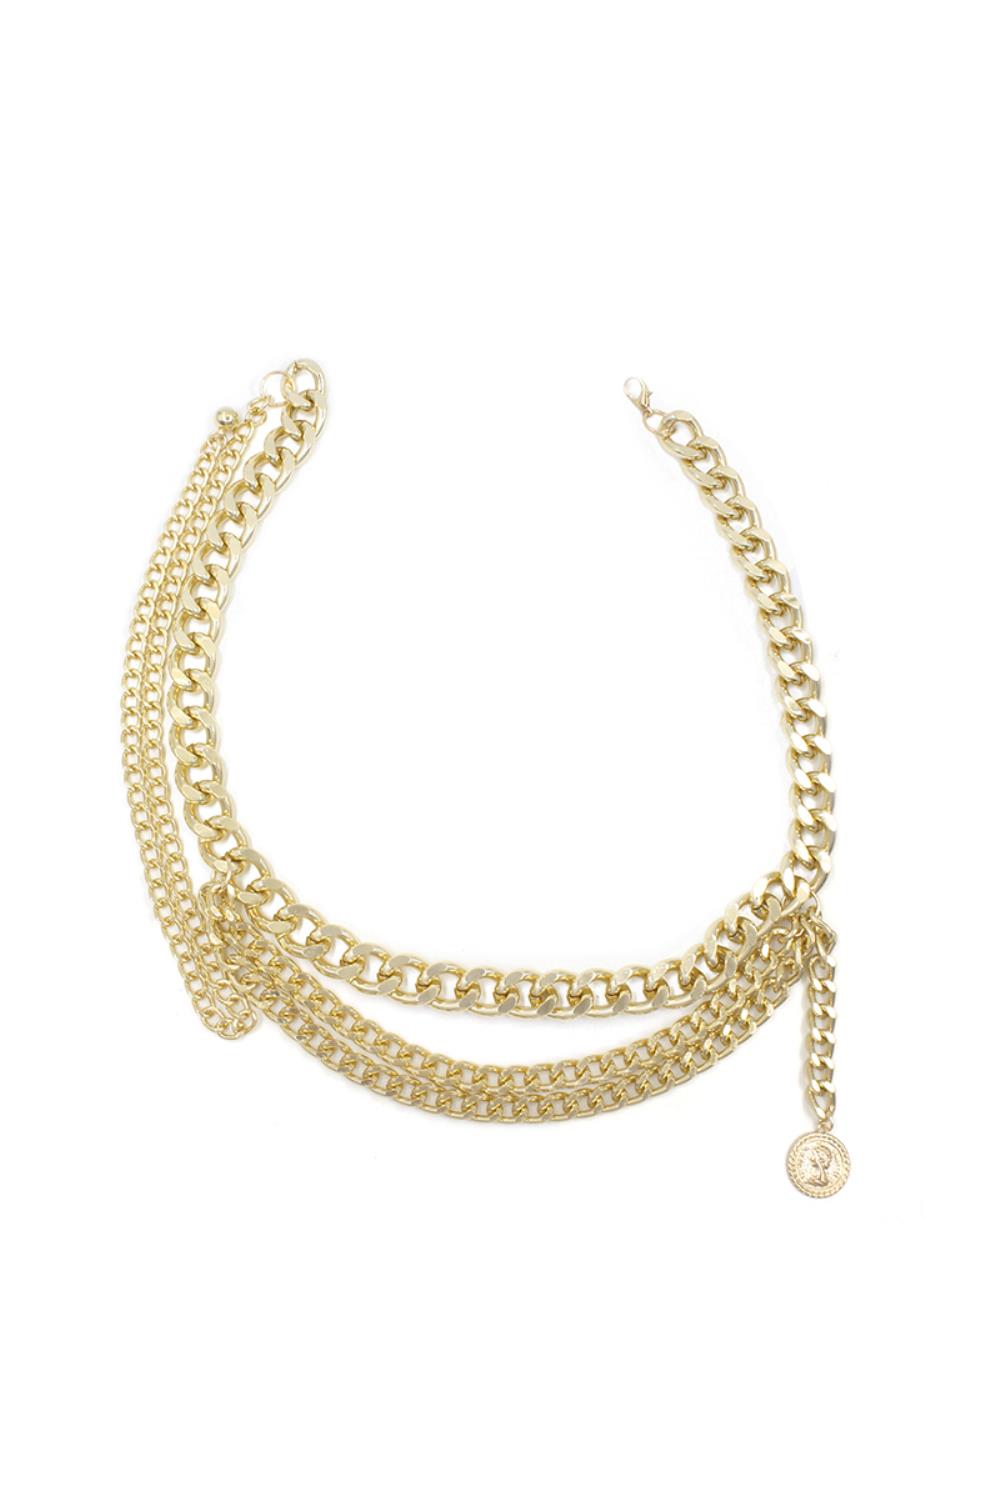 GOLD Double Drape Chunky Chain Drape Belt - Ships from The US - belt at TFC&H Co.